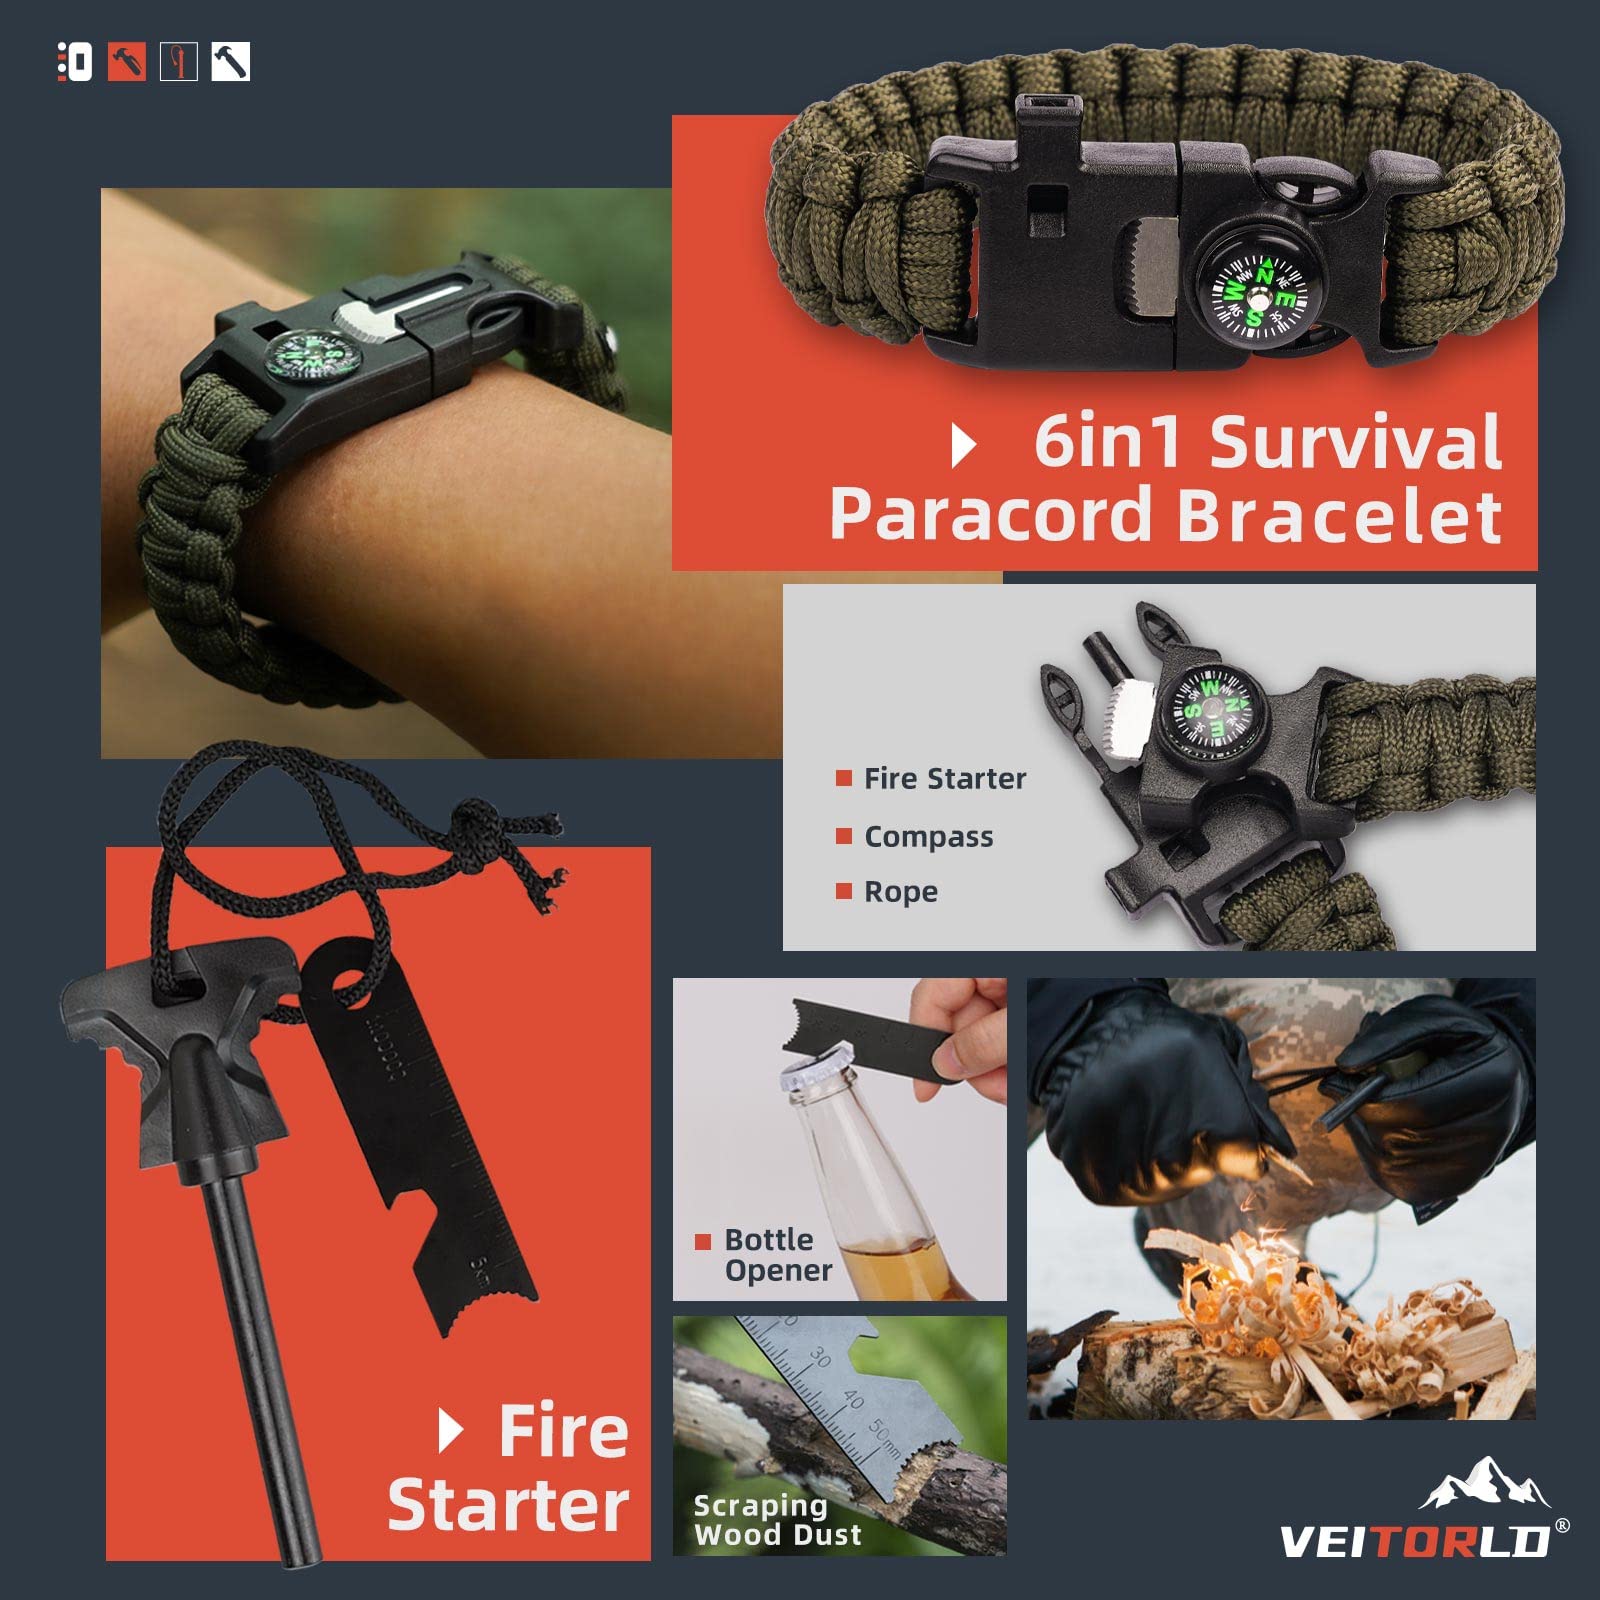 VEITORLD Gifts for Men Dad Him Christmas, Survival Gear and Equipment 12 in 1, Survival Kits, Cool Unique Fishing Hunting Birthday Gift for Husband Teen Boy Boyfriend Women, Stocking Stuffers for Men